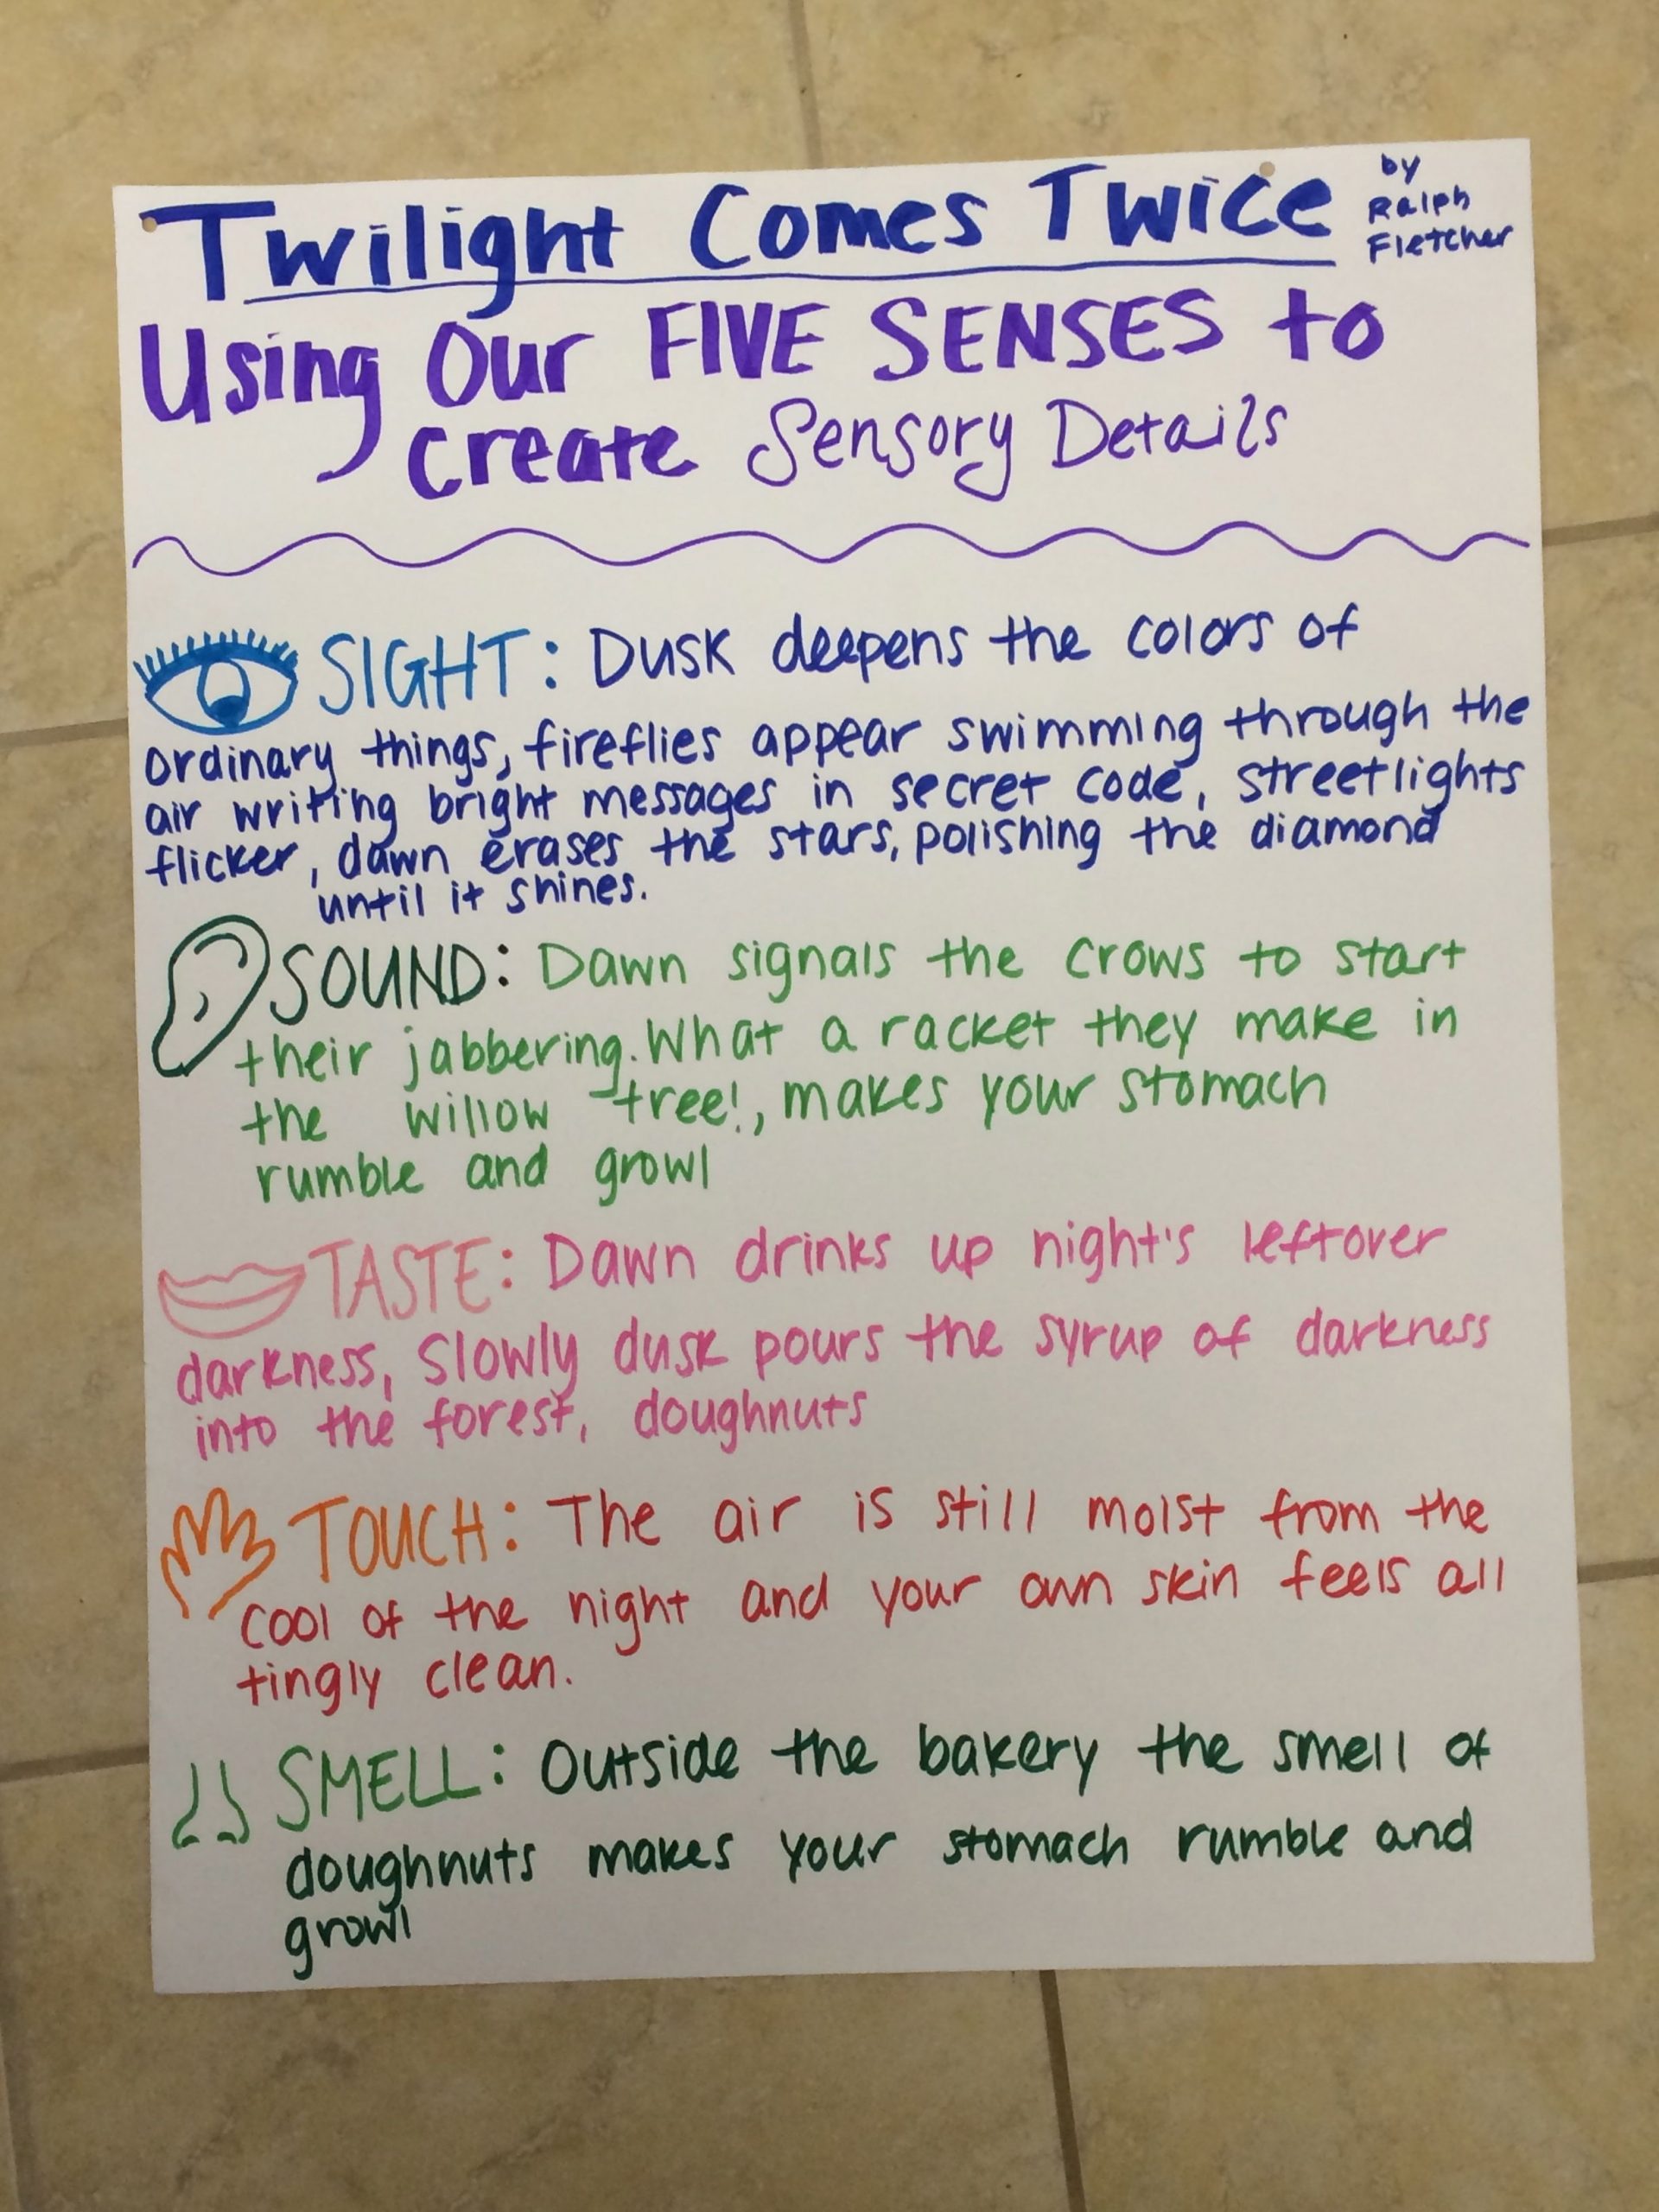 Twilight Comes Twice- Using Our Five Senses To Create